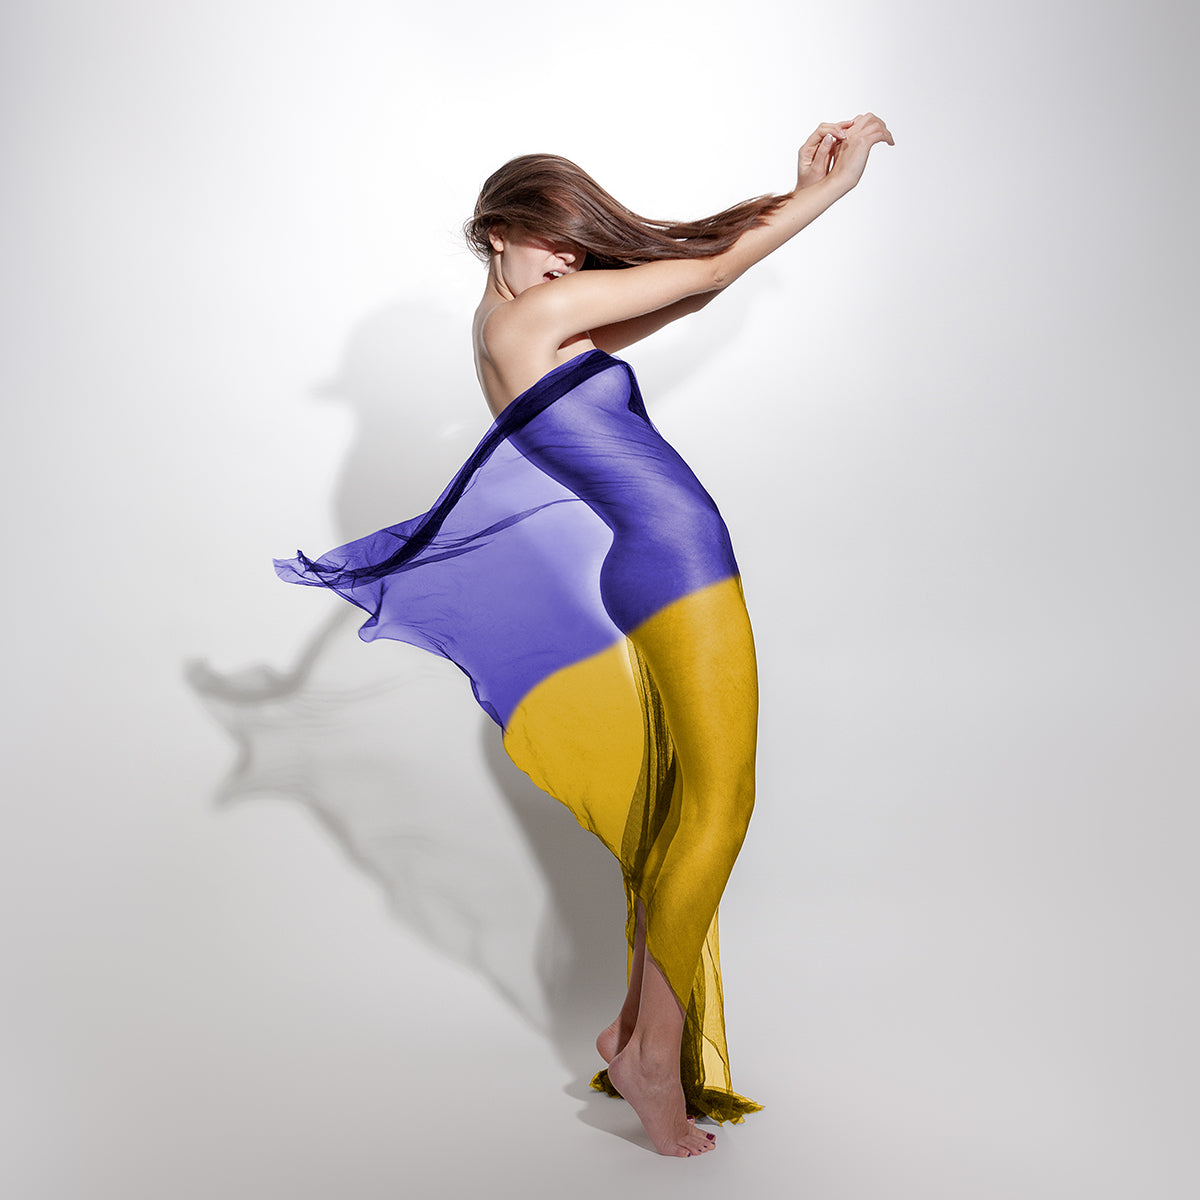 Stand for Ukraine; Model covered with Ukraine flag - buy the photo as print and all the money will go to help the refugees